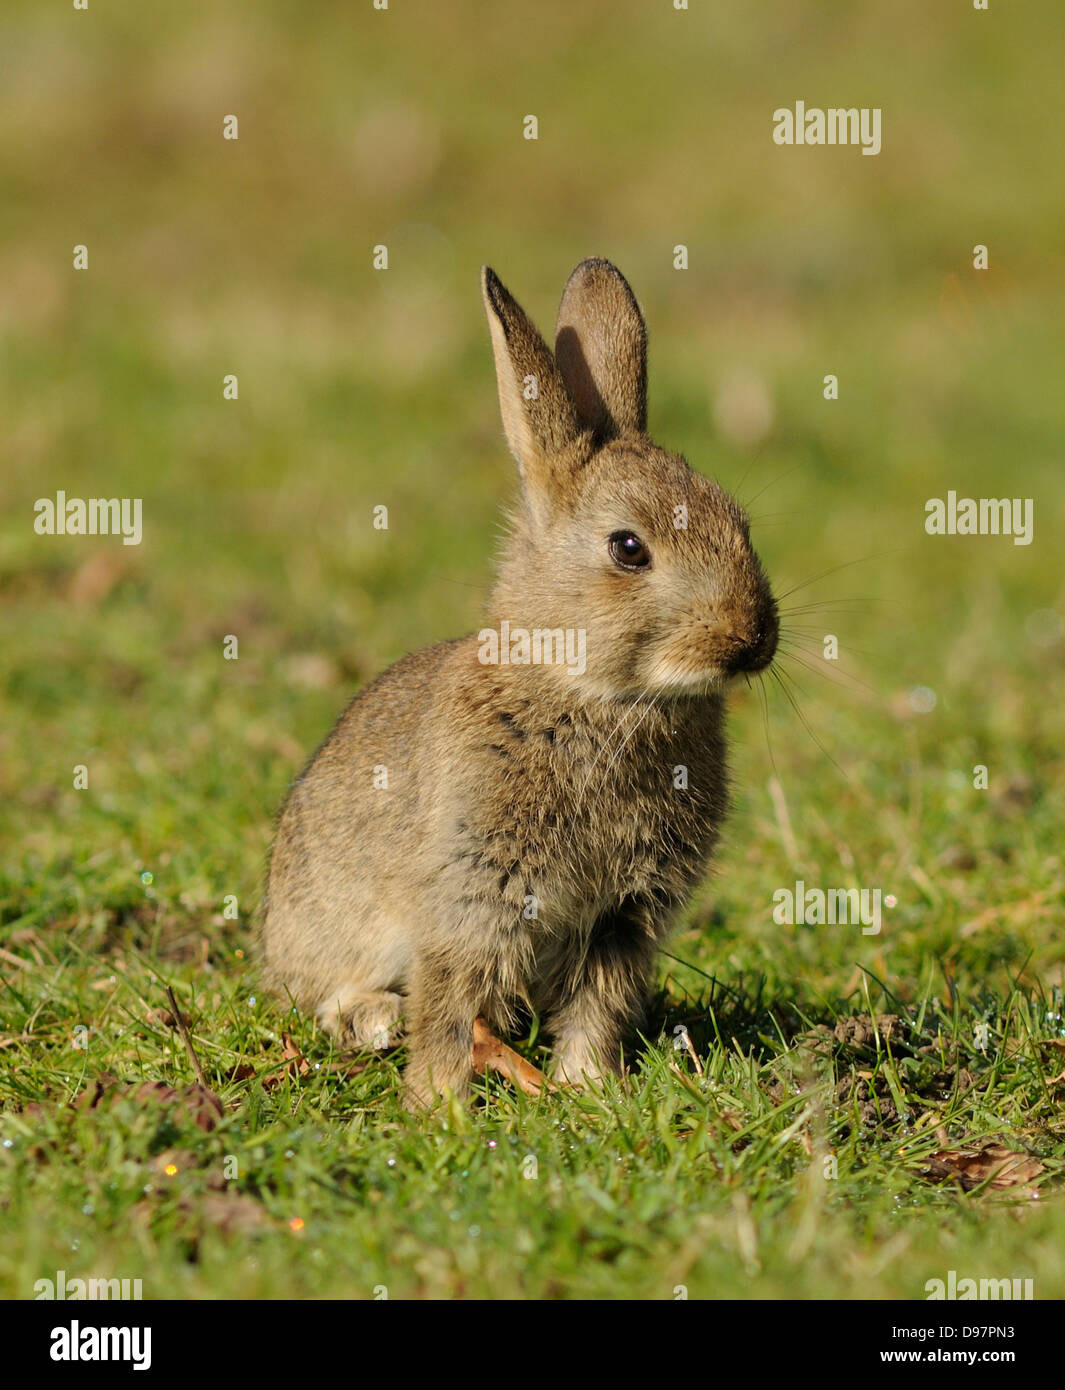 Young rabbit sitting in field Stock Photo